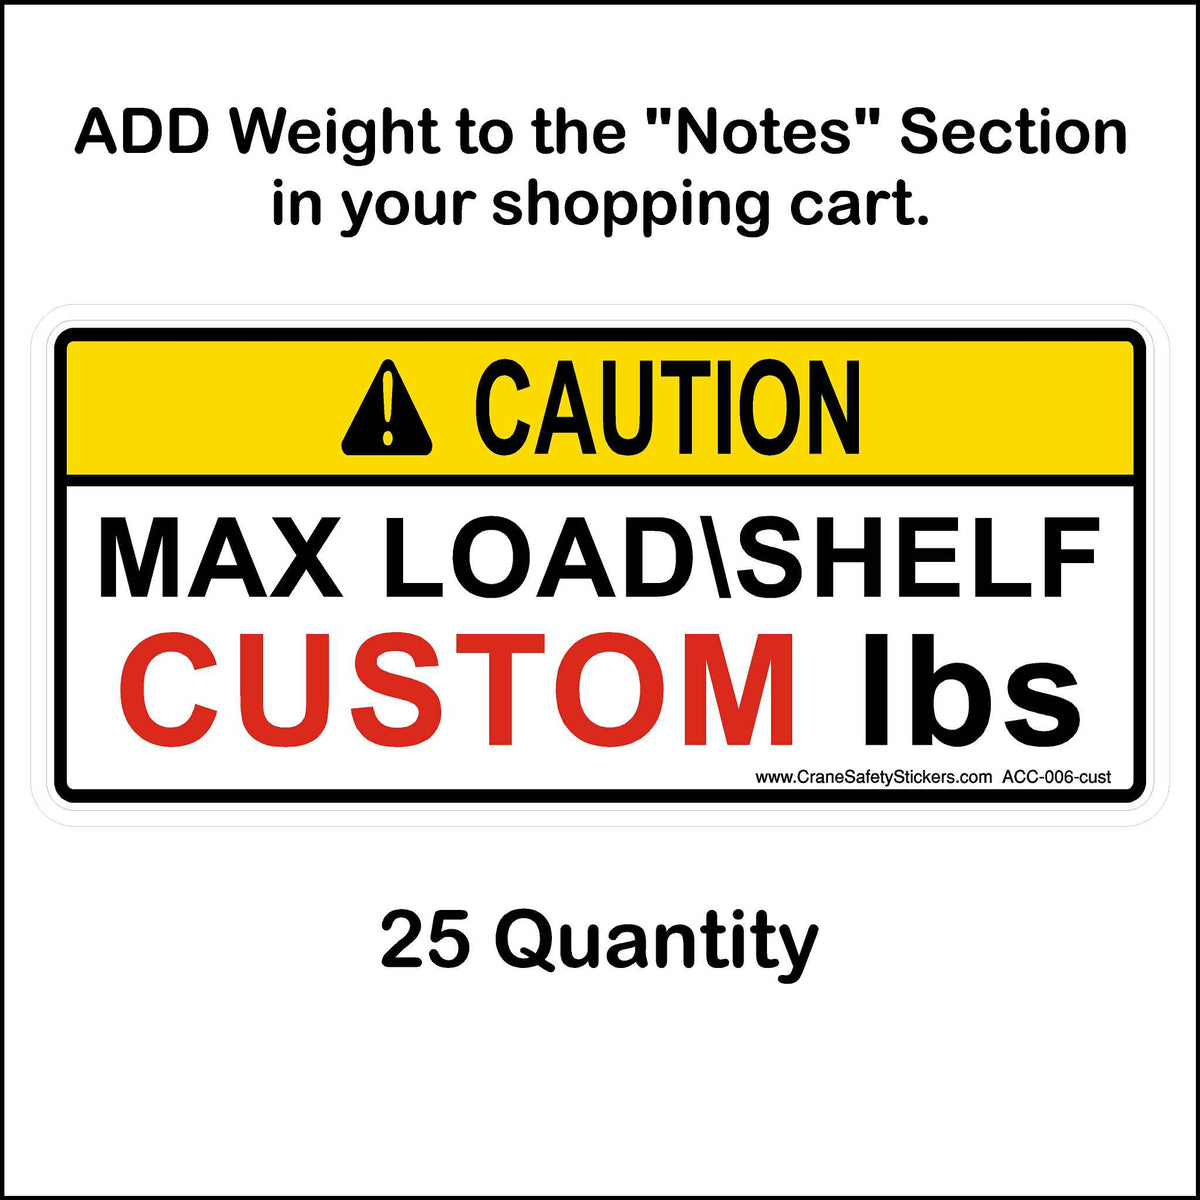 Custom Small Pallet Racking Sticker Printed with Caution Max Load Shelf. 25 Quantity.